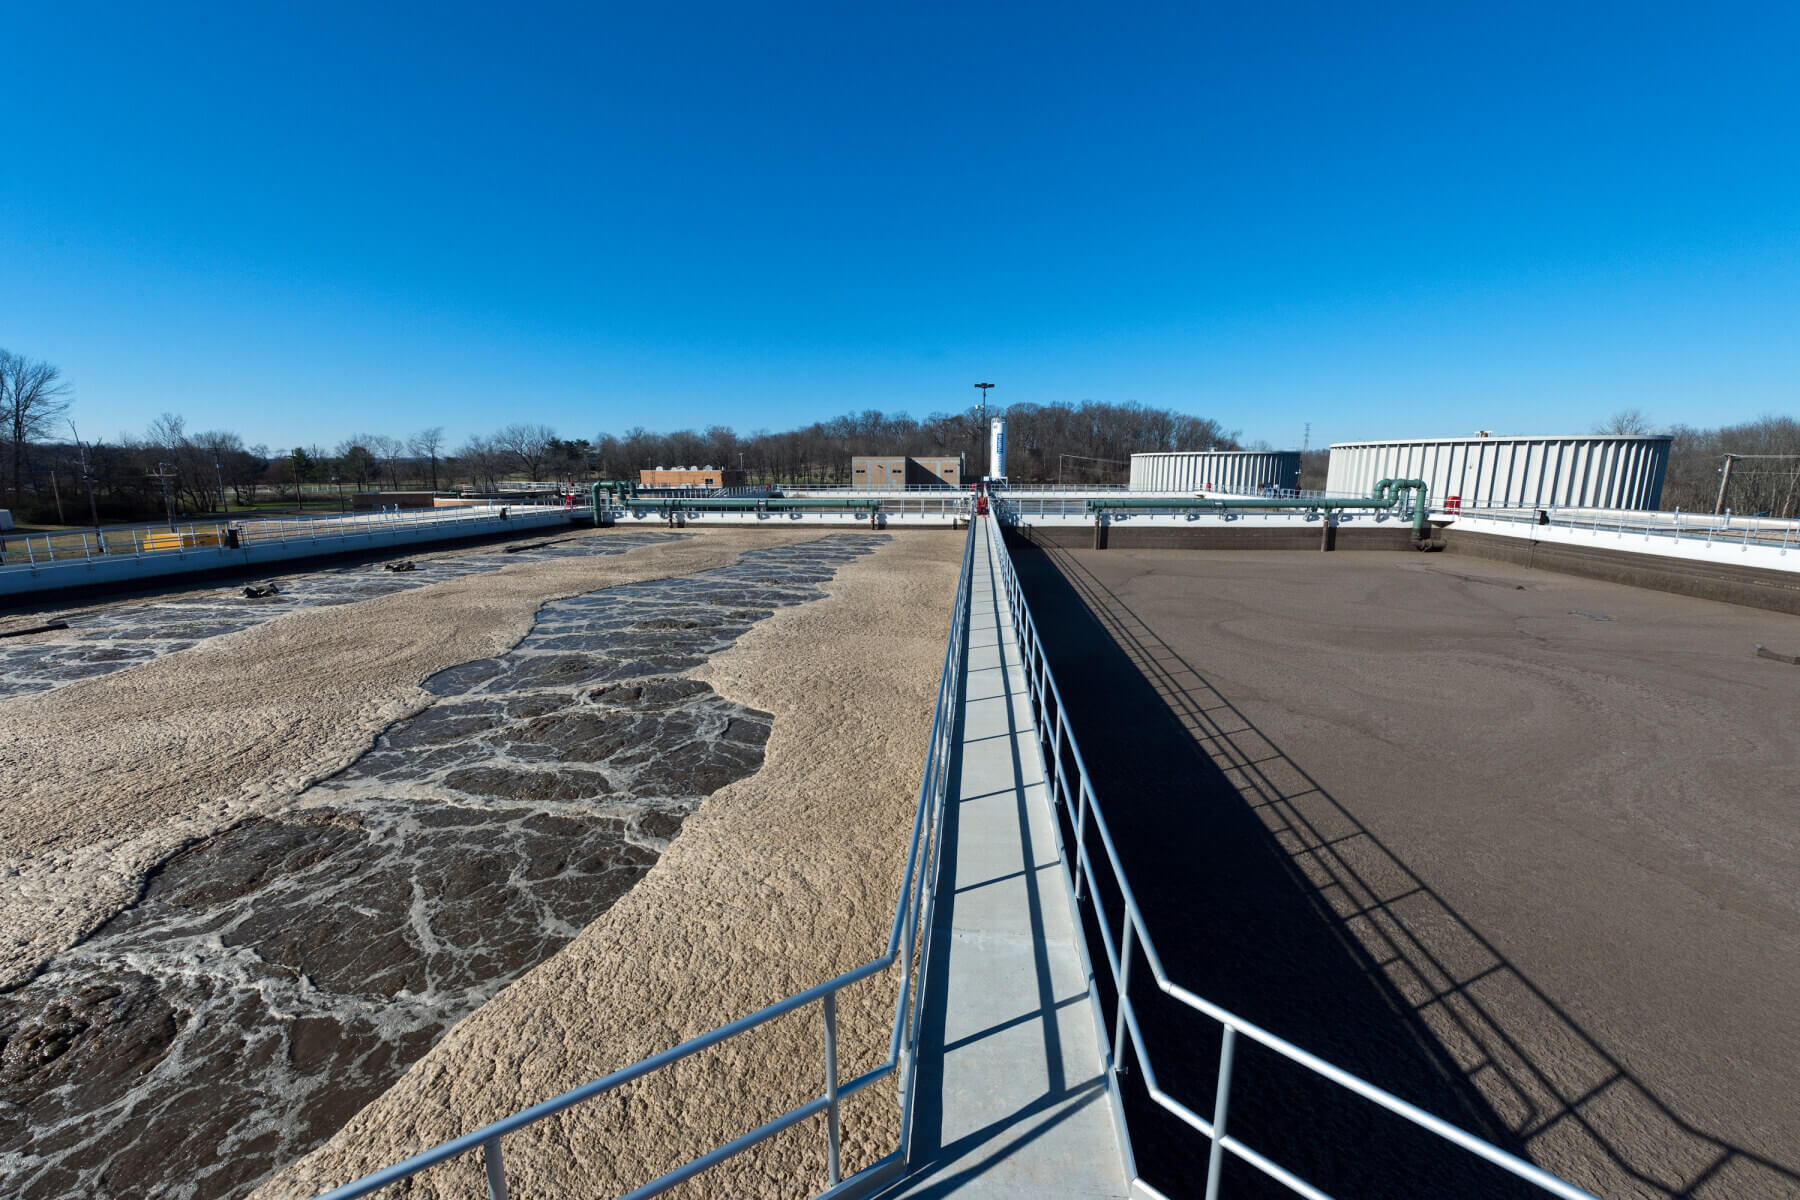 an aeration basin at the wastewater treatment plant